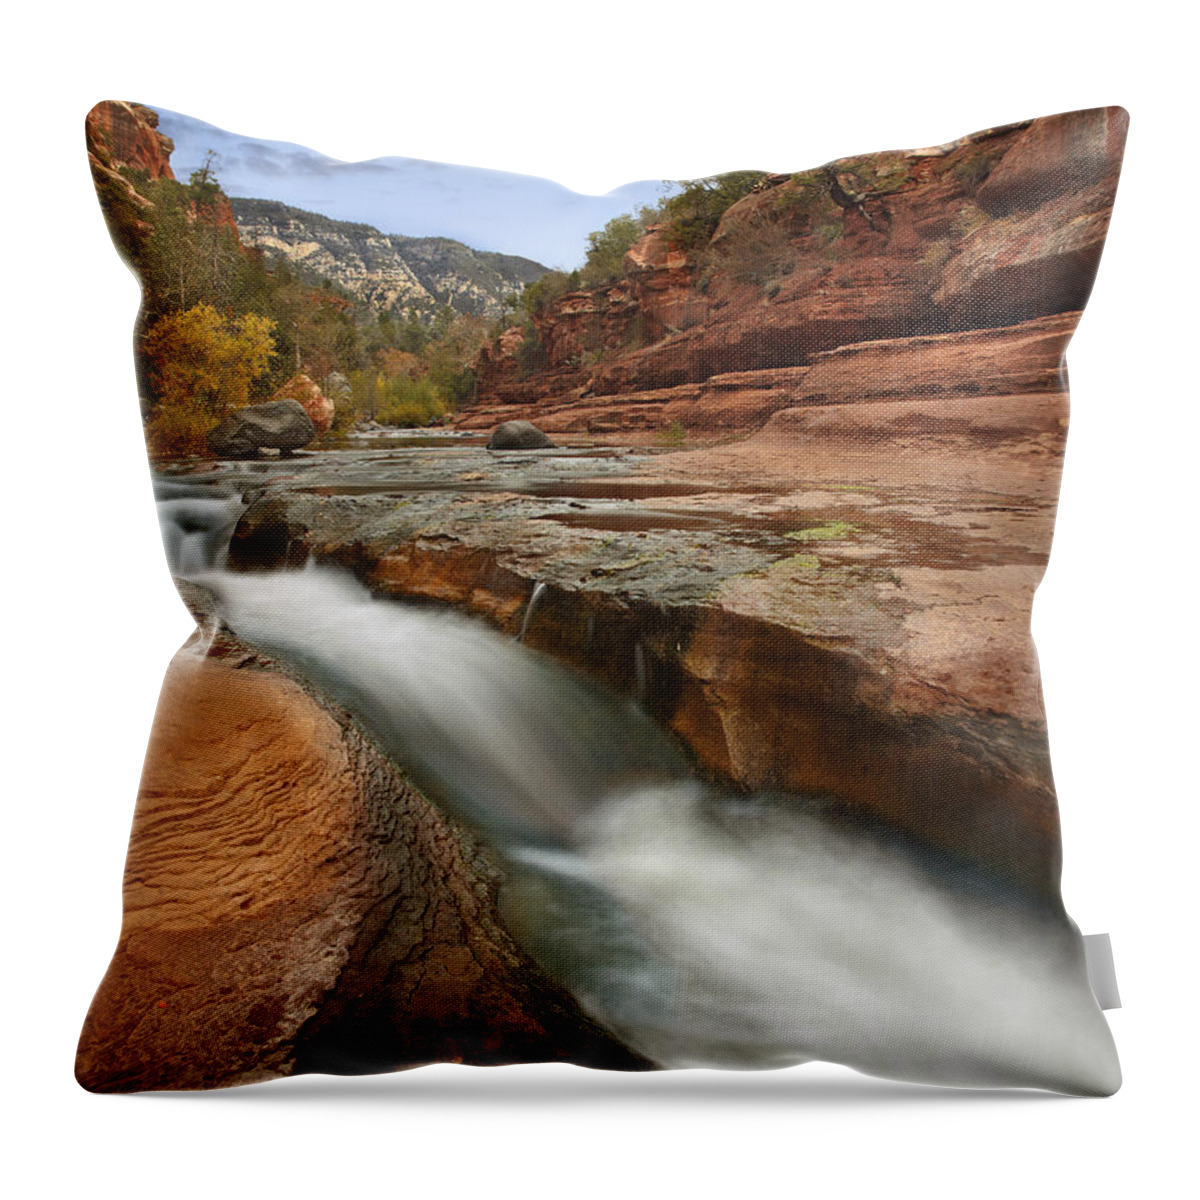 00438935 Throw Pillow featuring the photograph Oak Creek In Slide Rock State Park by Tim Fitzharris